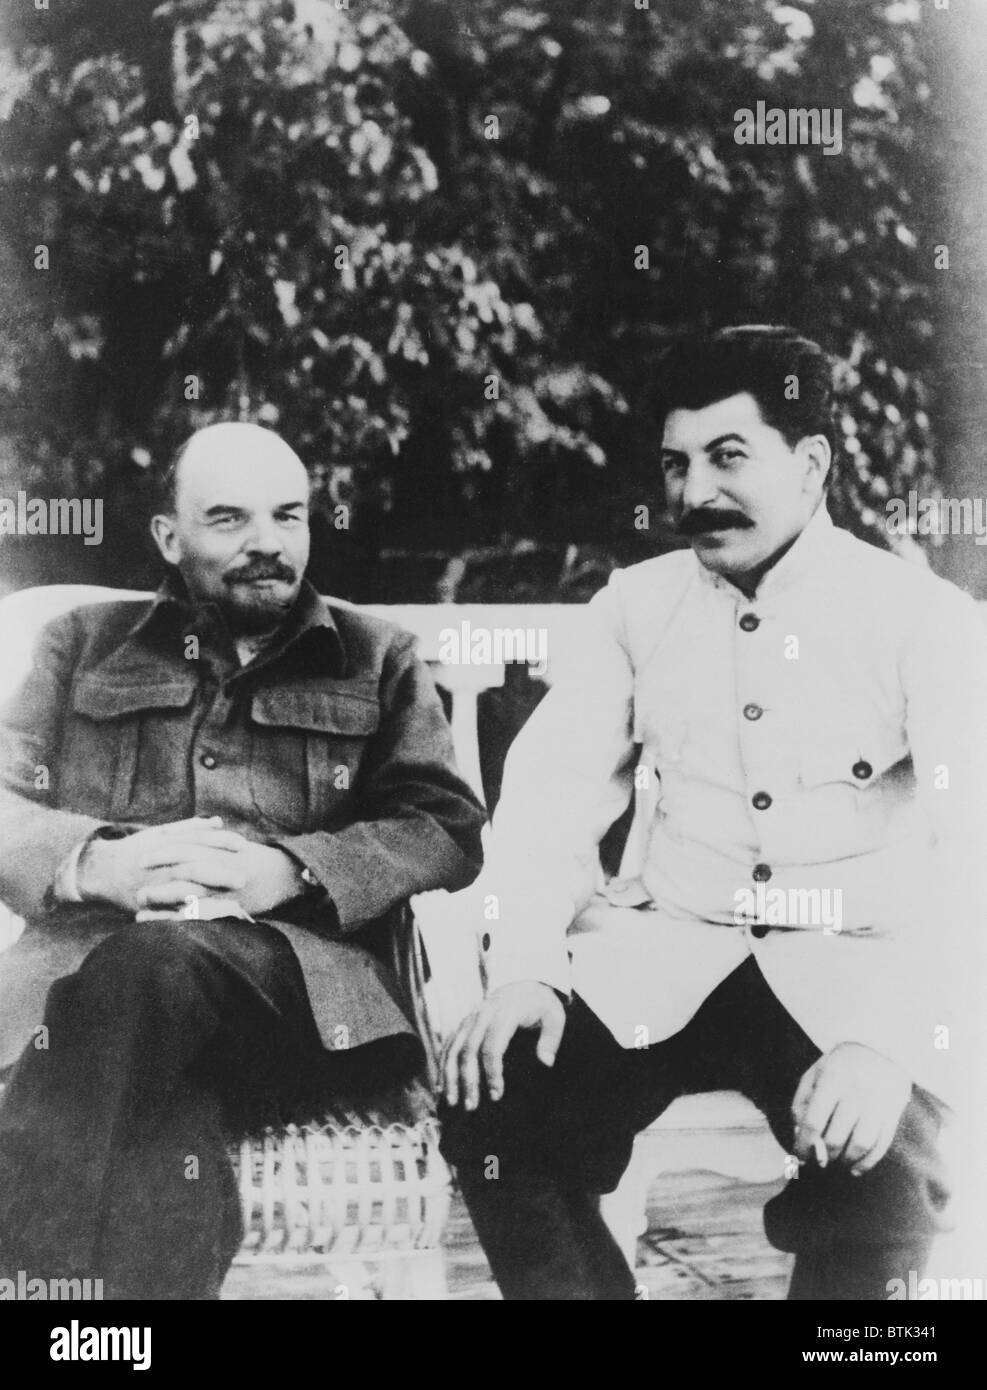 Joseph Stalin (1879-1953) and Vladimir Ilyich Lenin (1870-1924). Lenin was succeeded by Stalin, who consolidated dictatorial powers after Lenin's death. Stock Photo